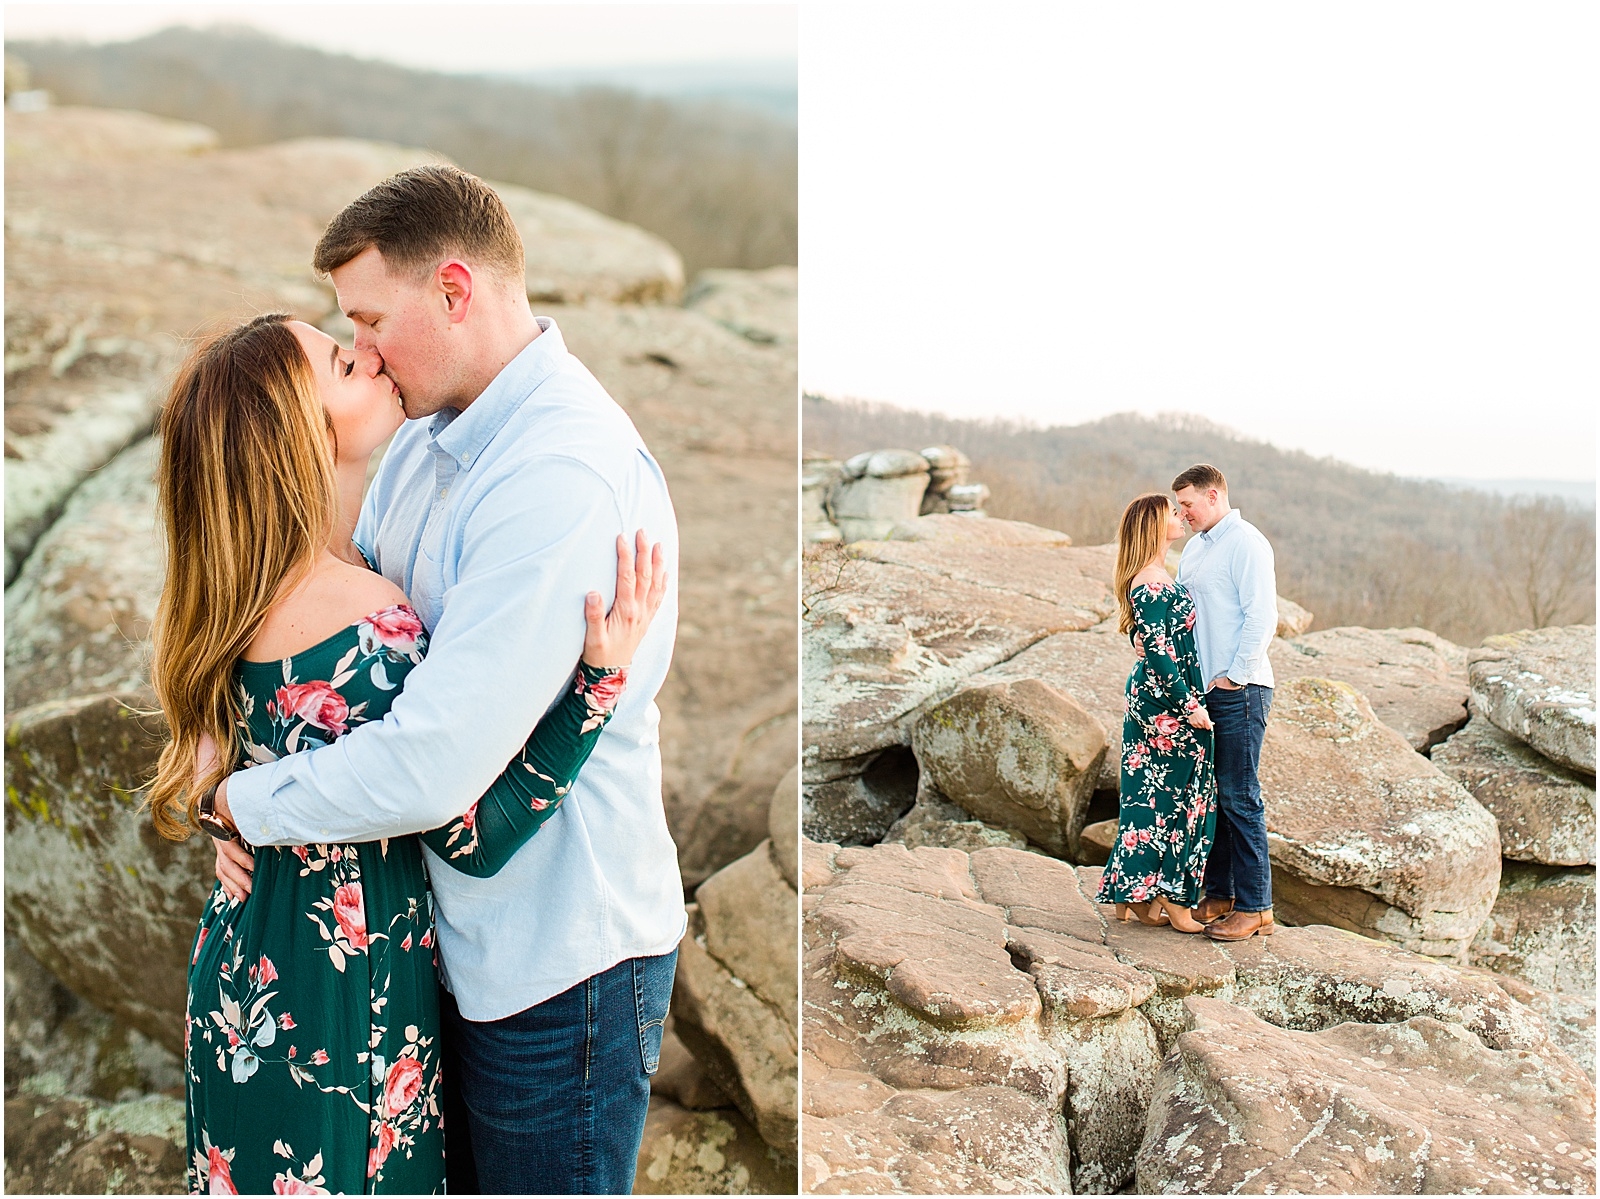 A Sunny Garden of the Gods Engagement Session | Shiloh and Lee | Bret and Brandie Photography089.jpg